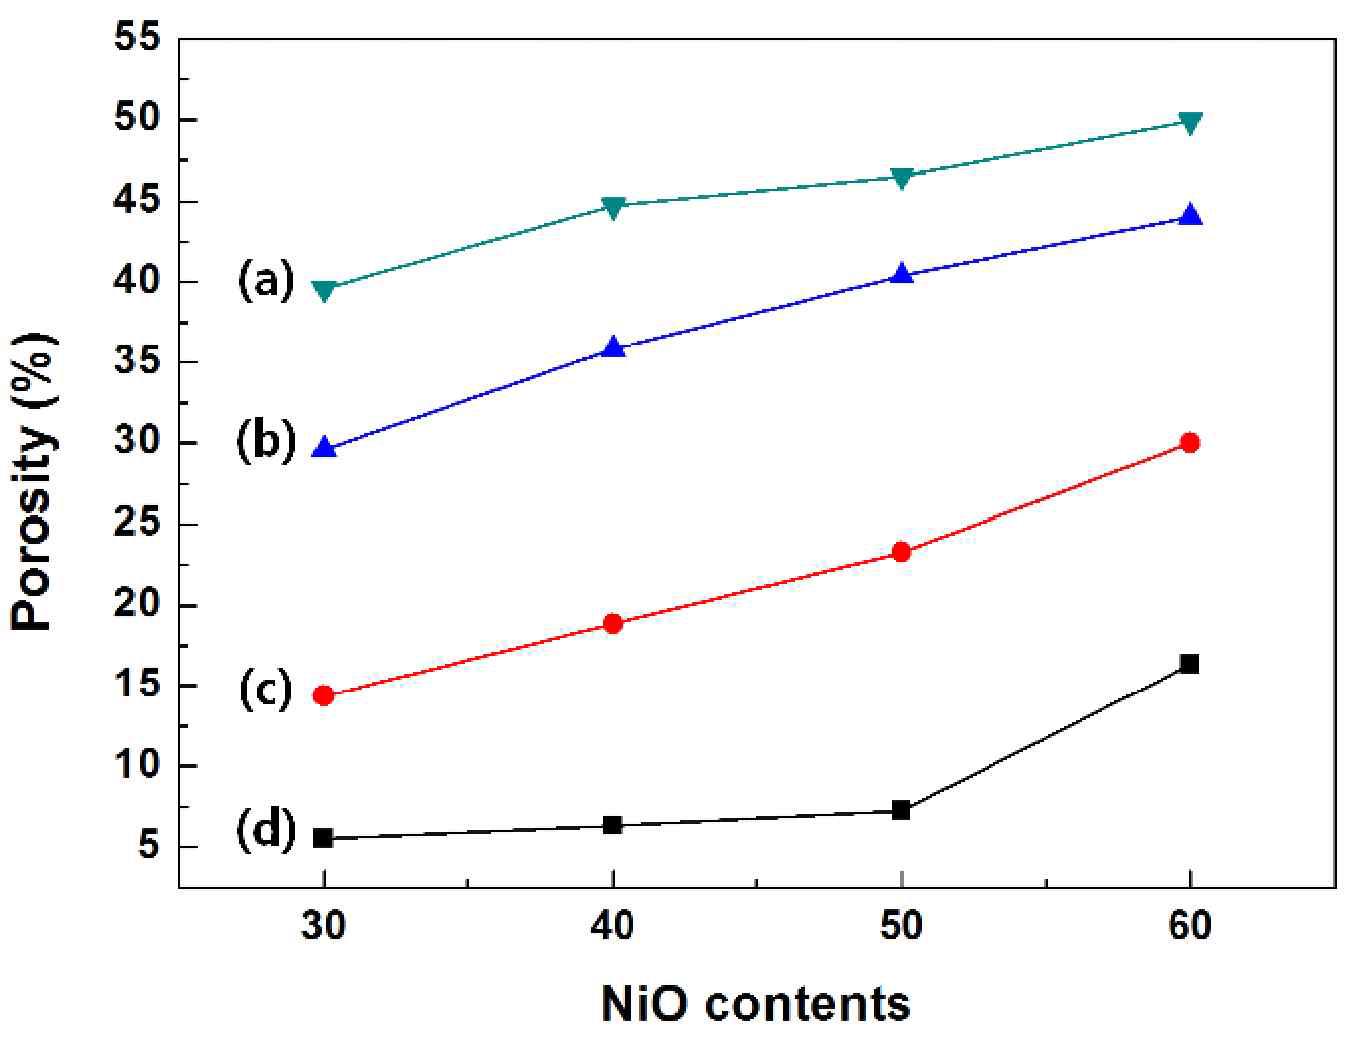 Porosity of the NiO/YSZ composites (10 wt% carbon black) sintered at (a) 1250 ℃, (b) 1300 ℃, (c) 1350 ℃, and (d) 1400 ℃ as a function of NiO content.